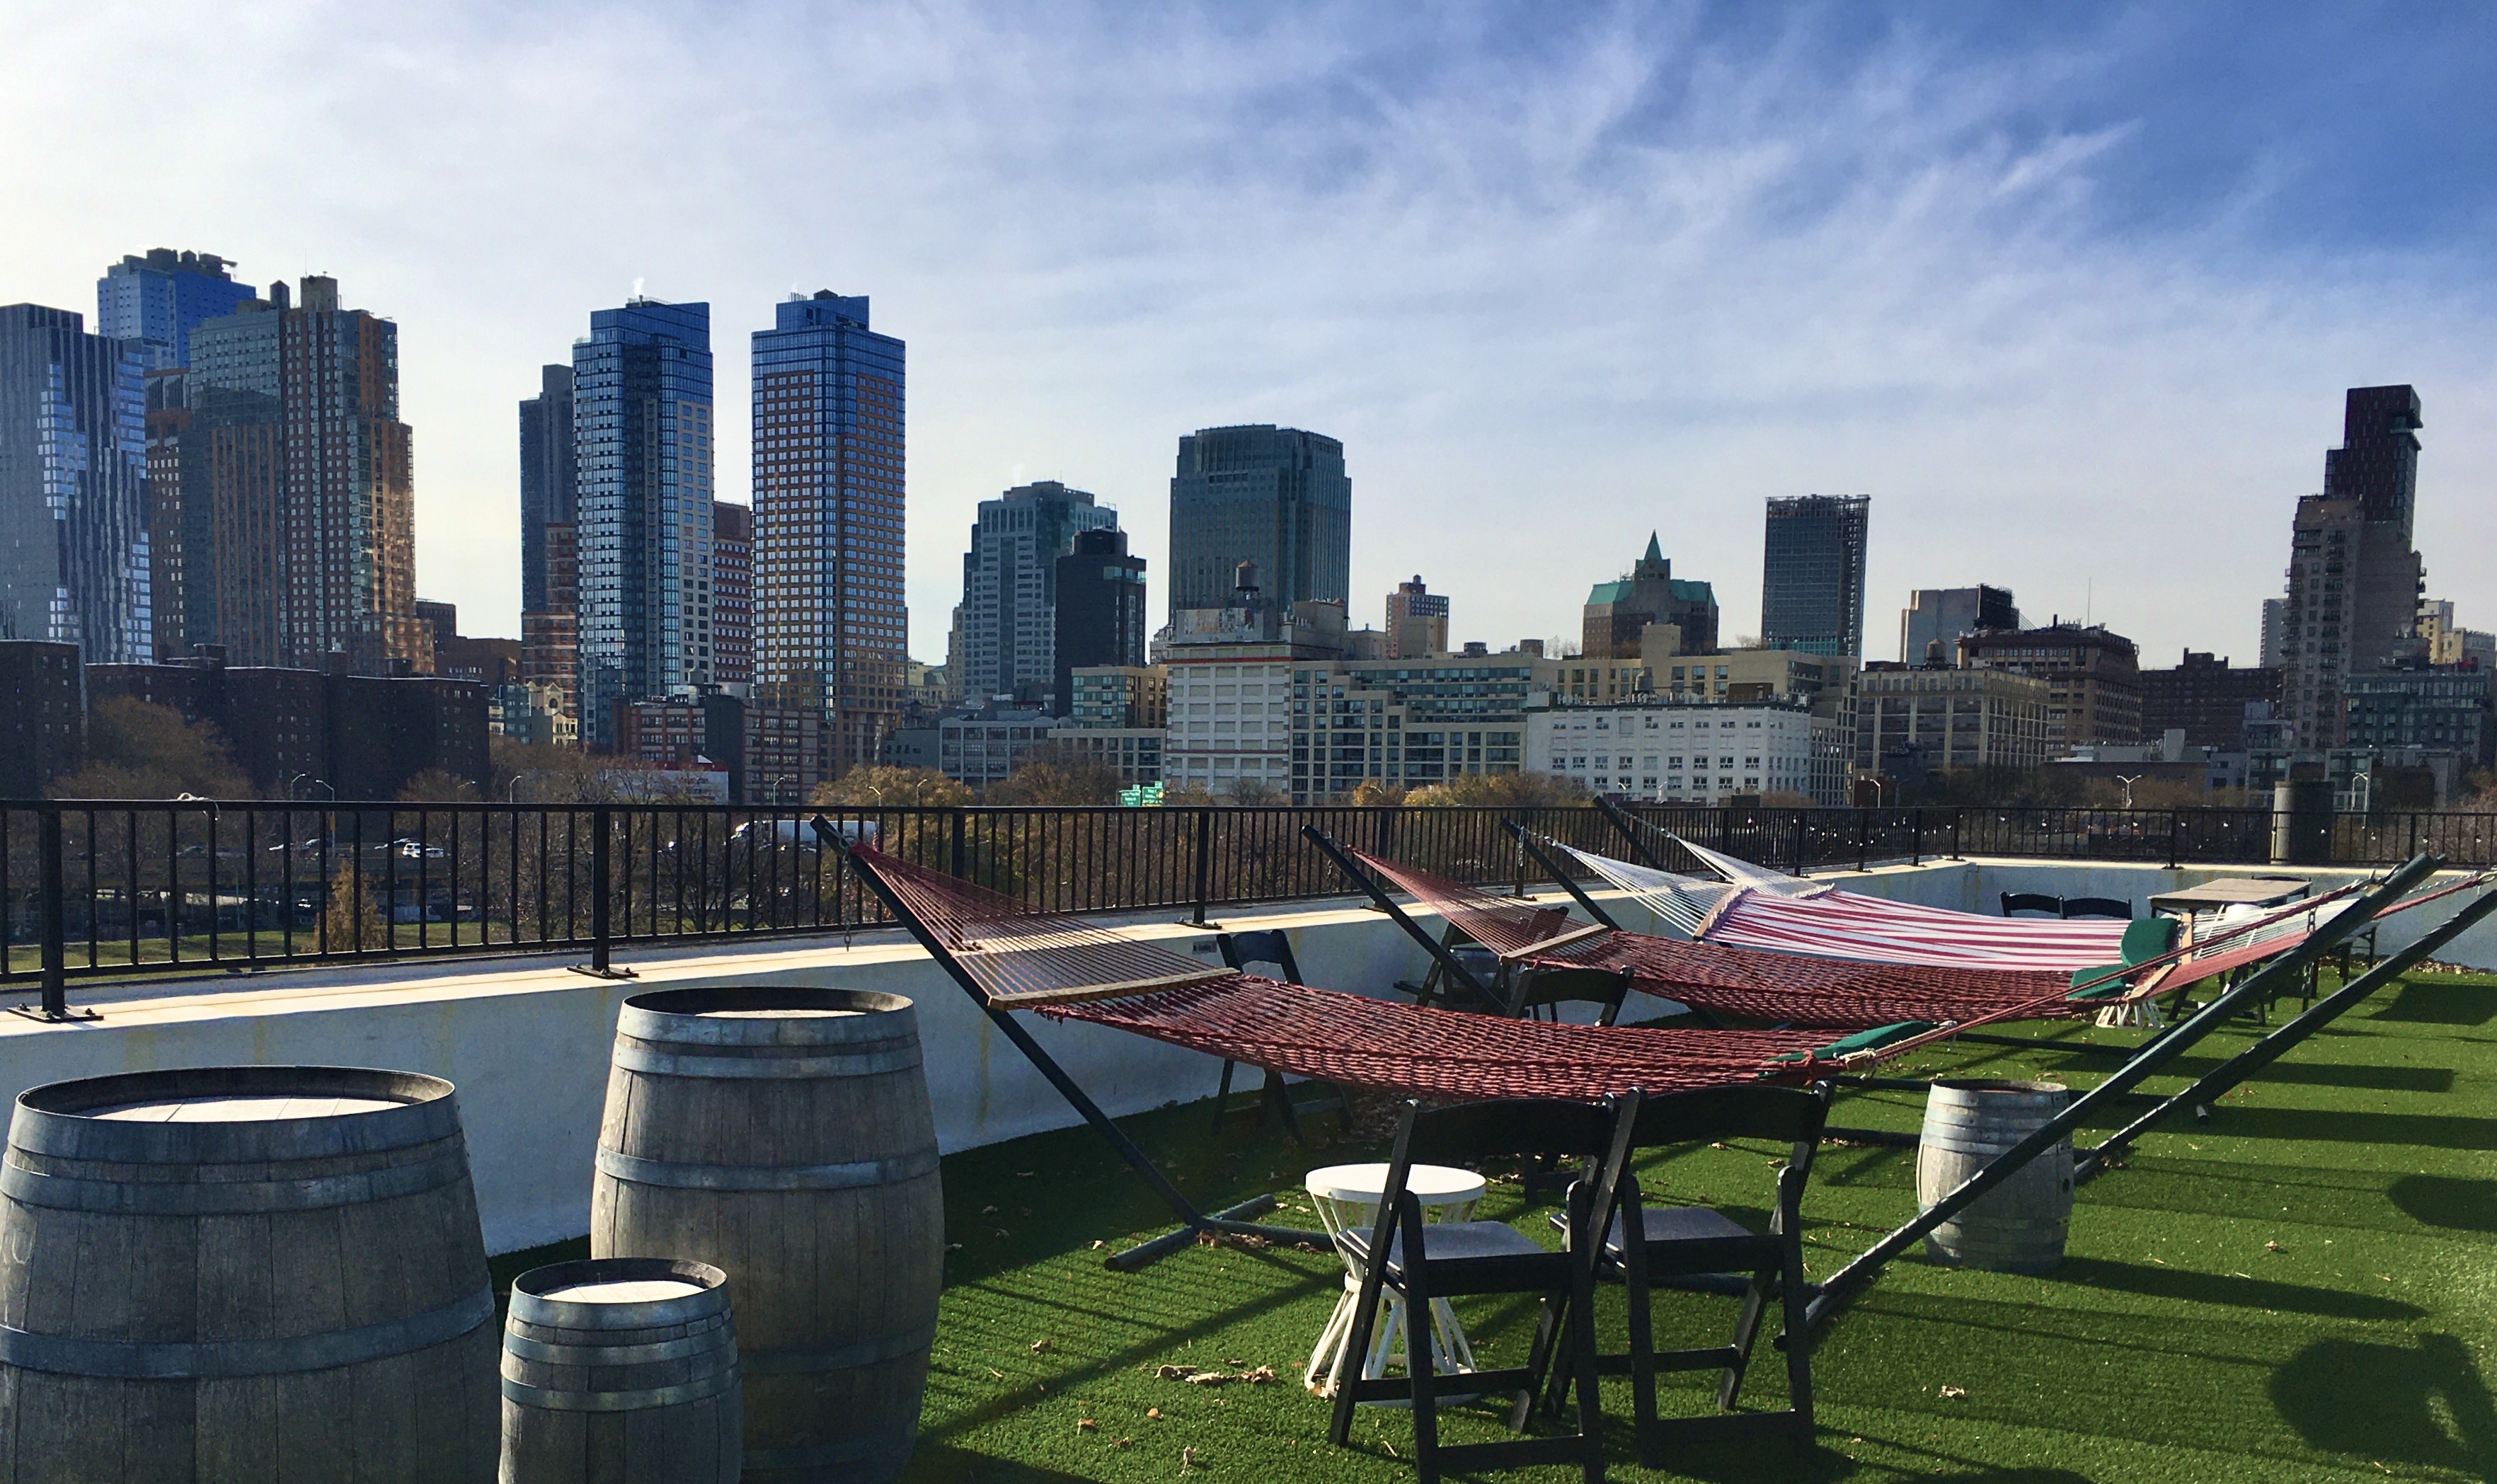 Downtown Brooklyn’s skyline looks pretty great from Rooftop Reds, which is an urban vineyard in the Brooklyn Navy Yard. Photo: Lore Croghan/Brooklyn Eagle